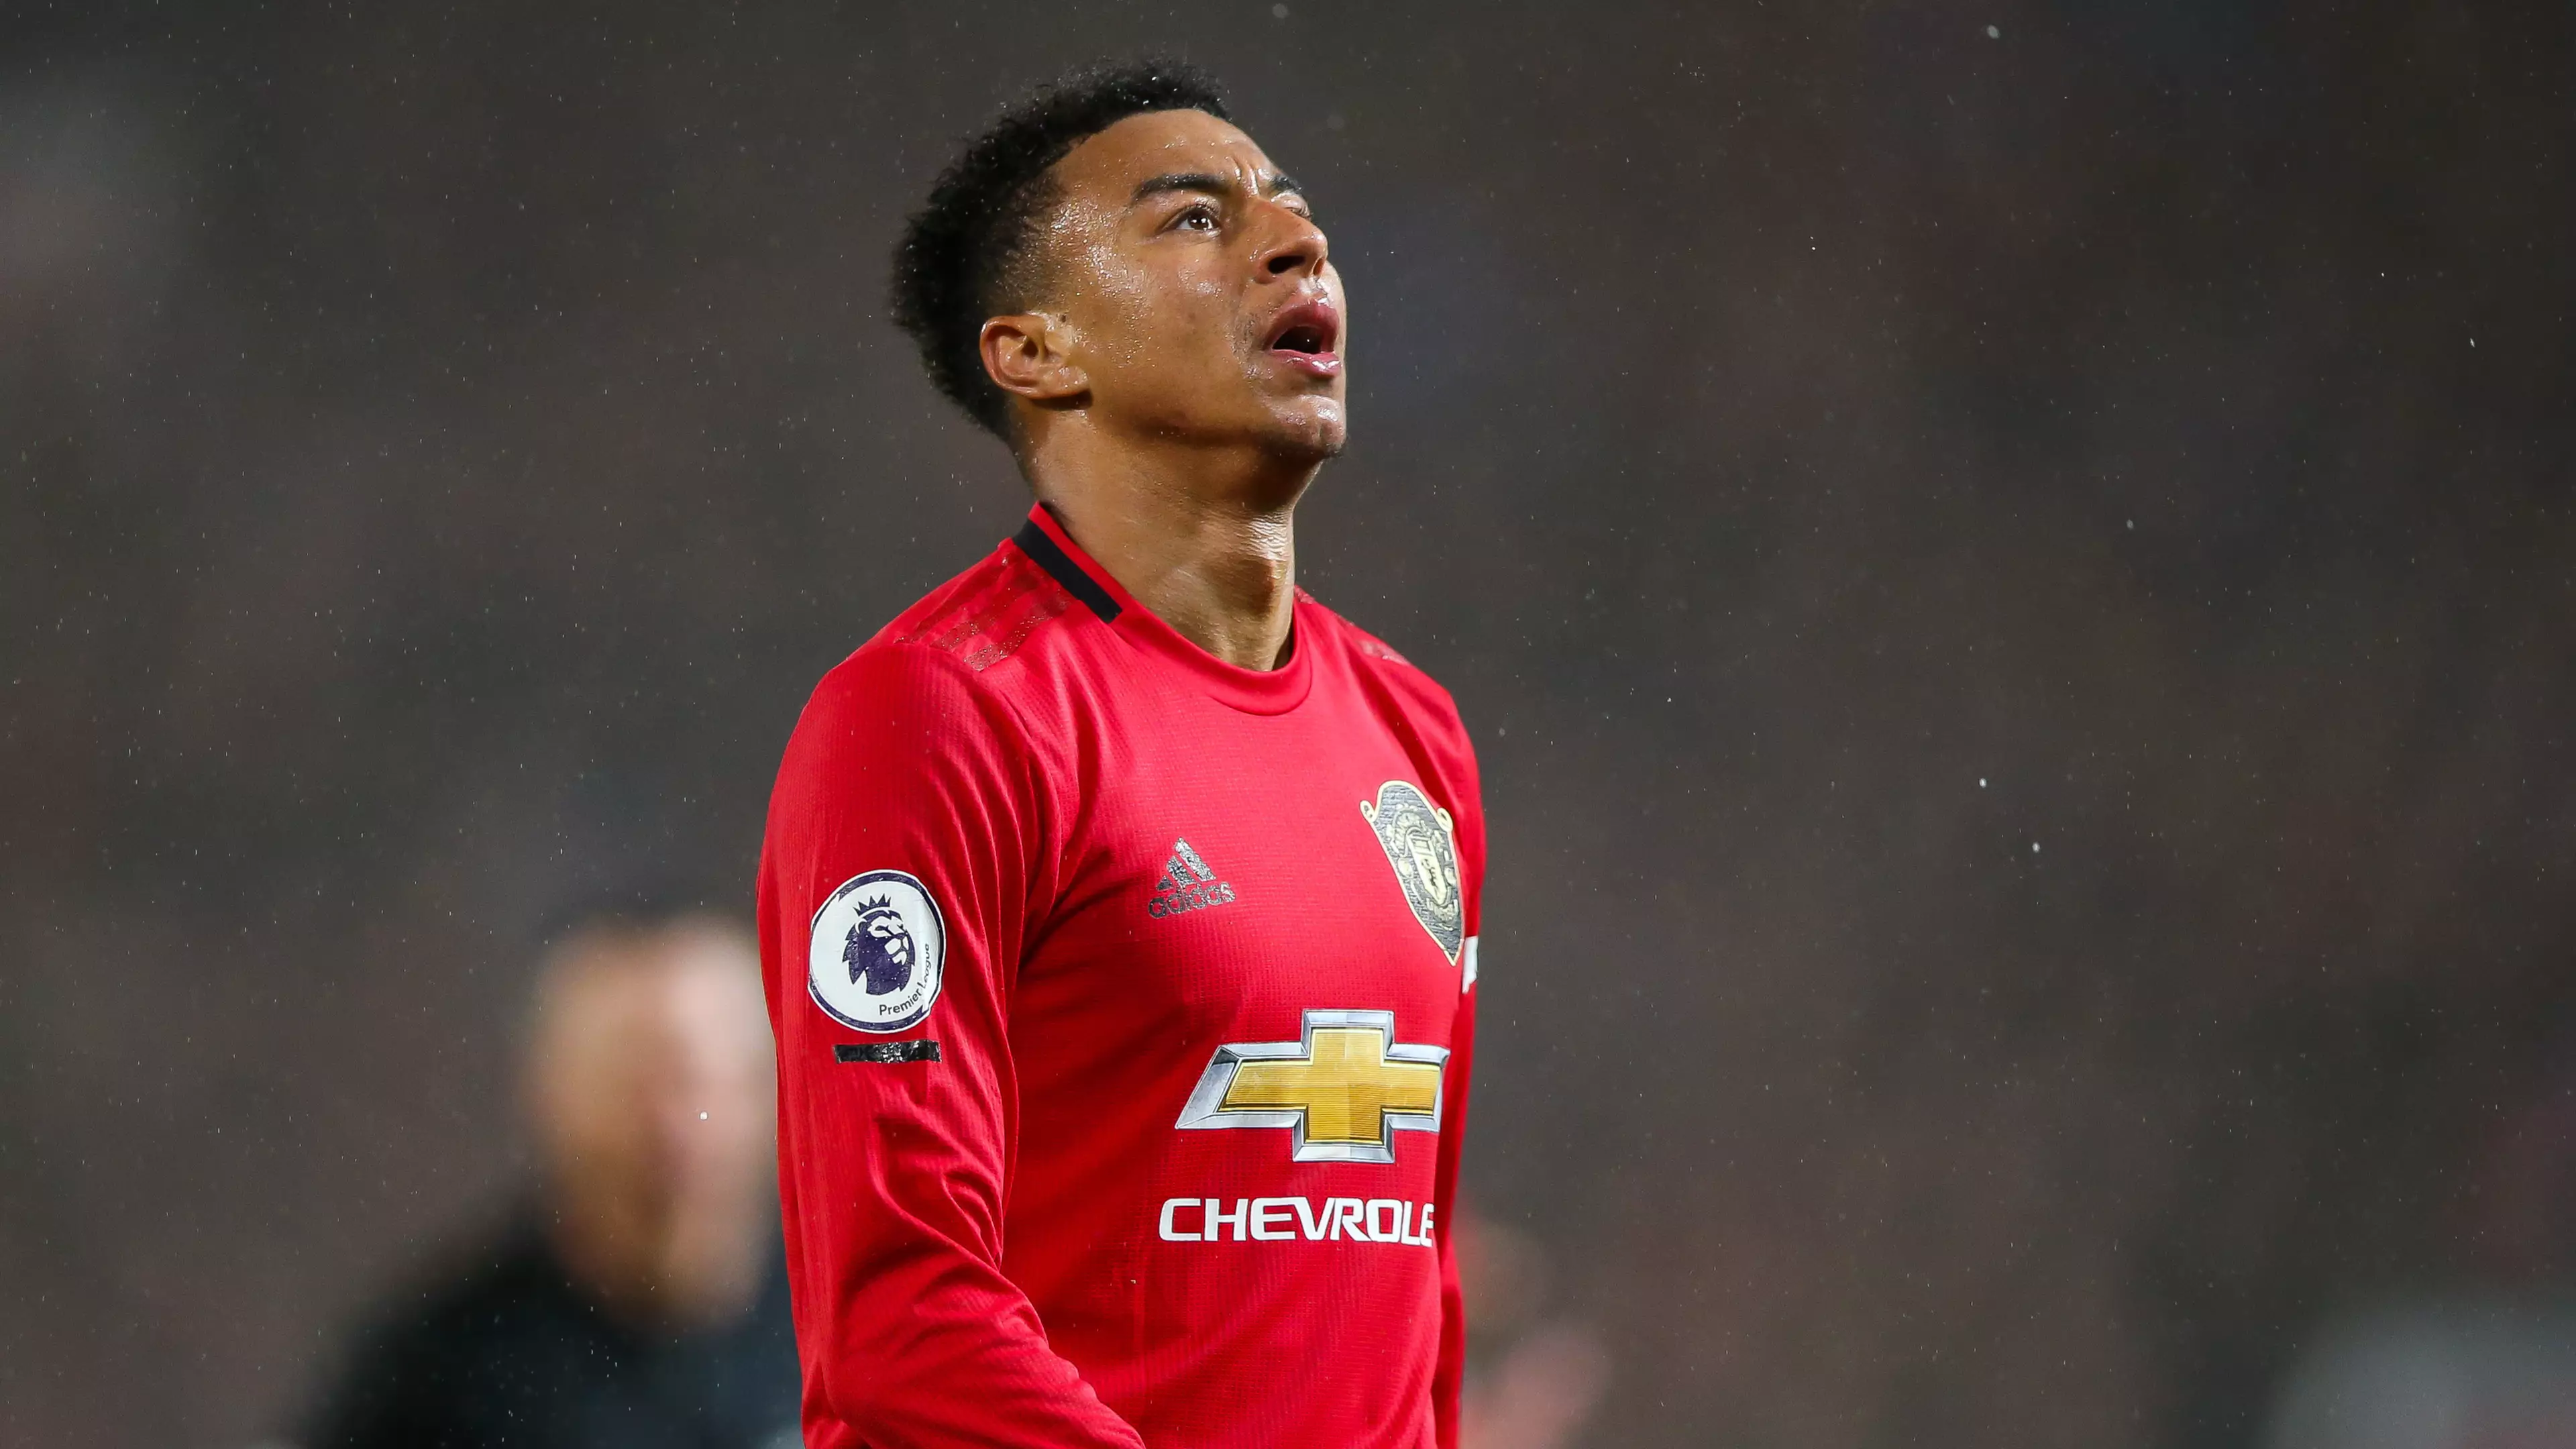 Fan Placed A Bet On Jesse Lingard Failing To Score Or Assist In The Premier League This Season